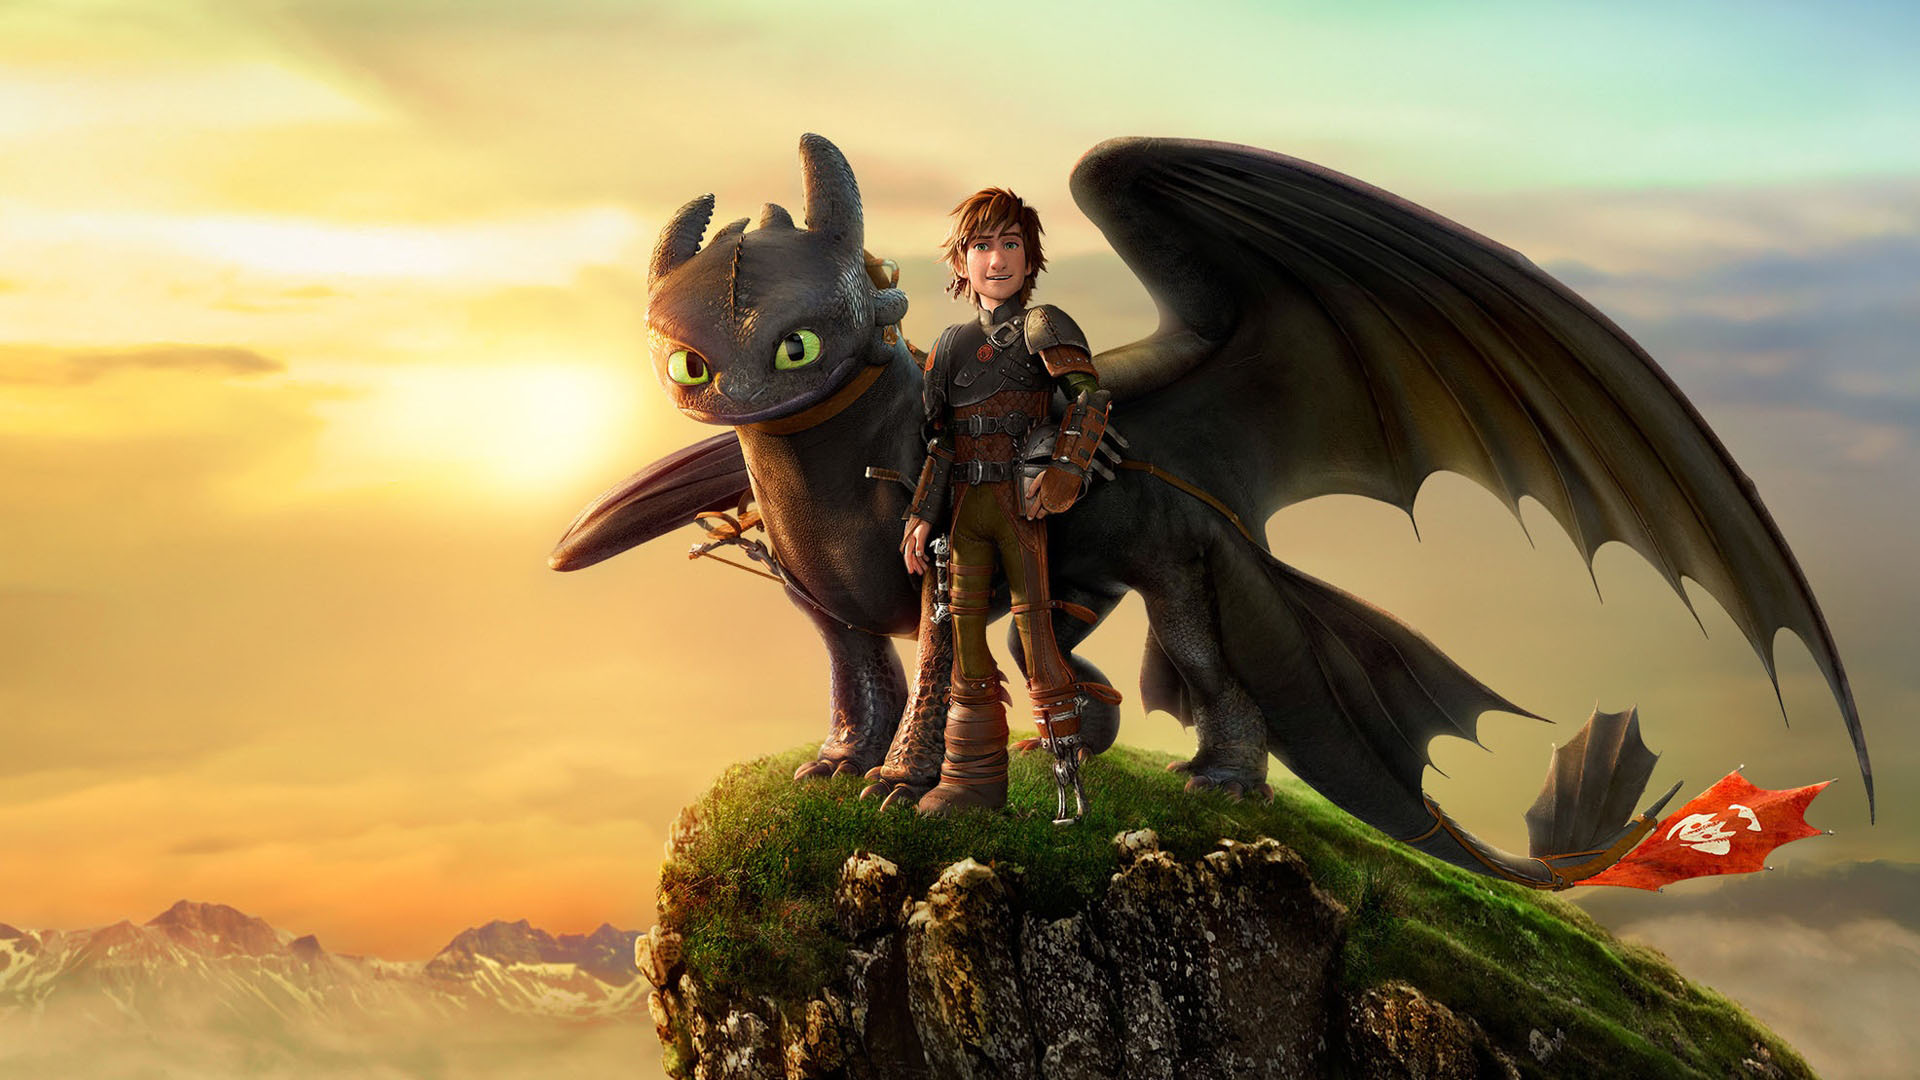 How To Train Your Dragon #5